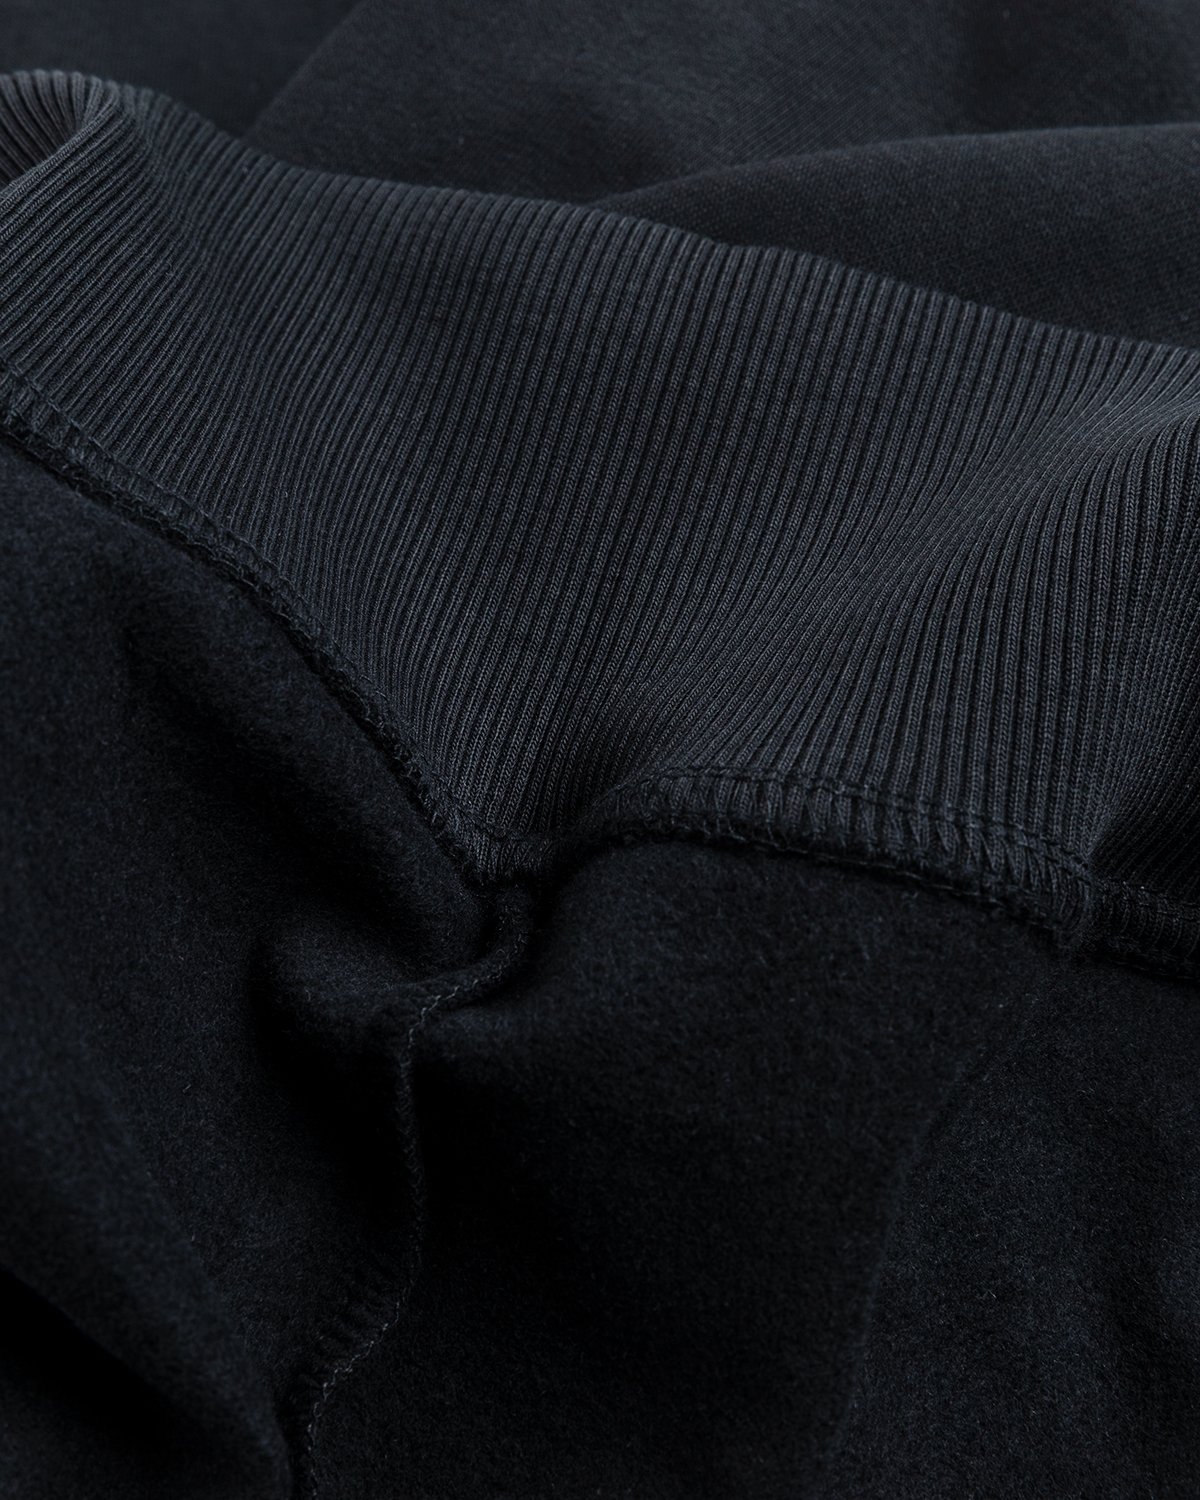 The North Face - Oversized Essential Hoodie Black - Clothing - Black - Image 5